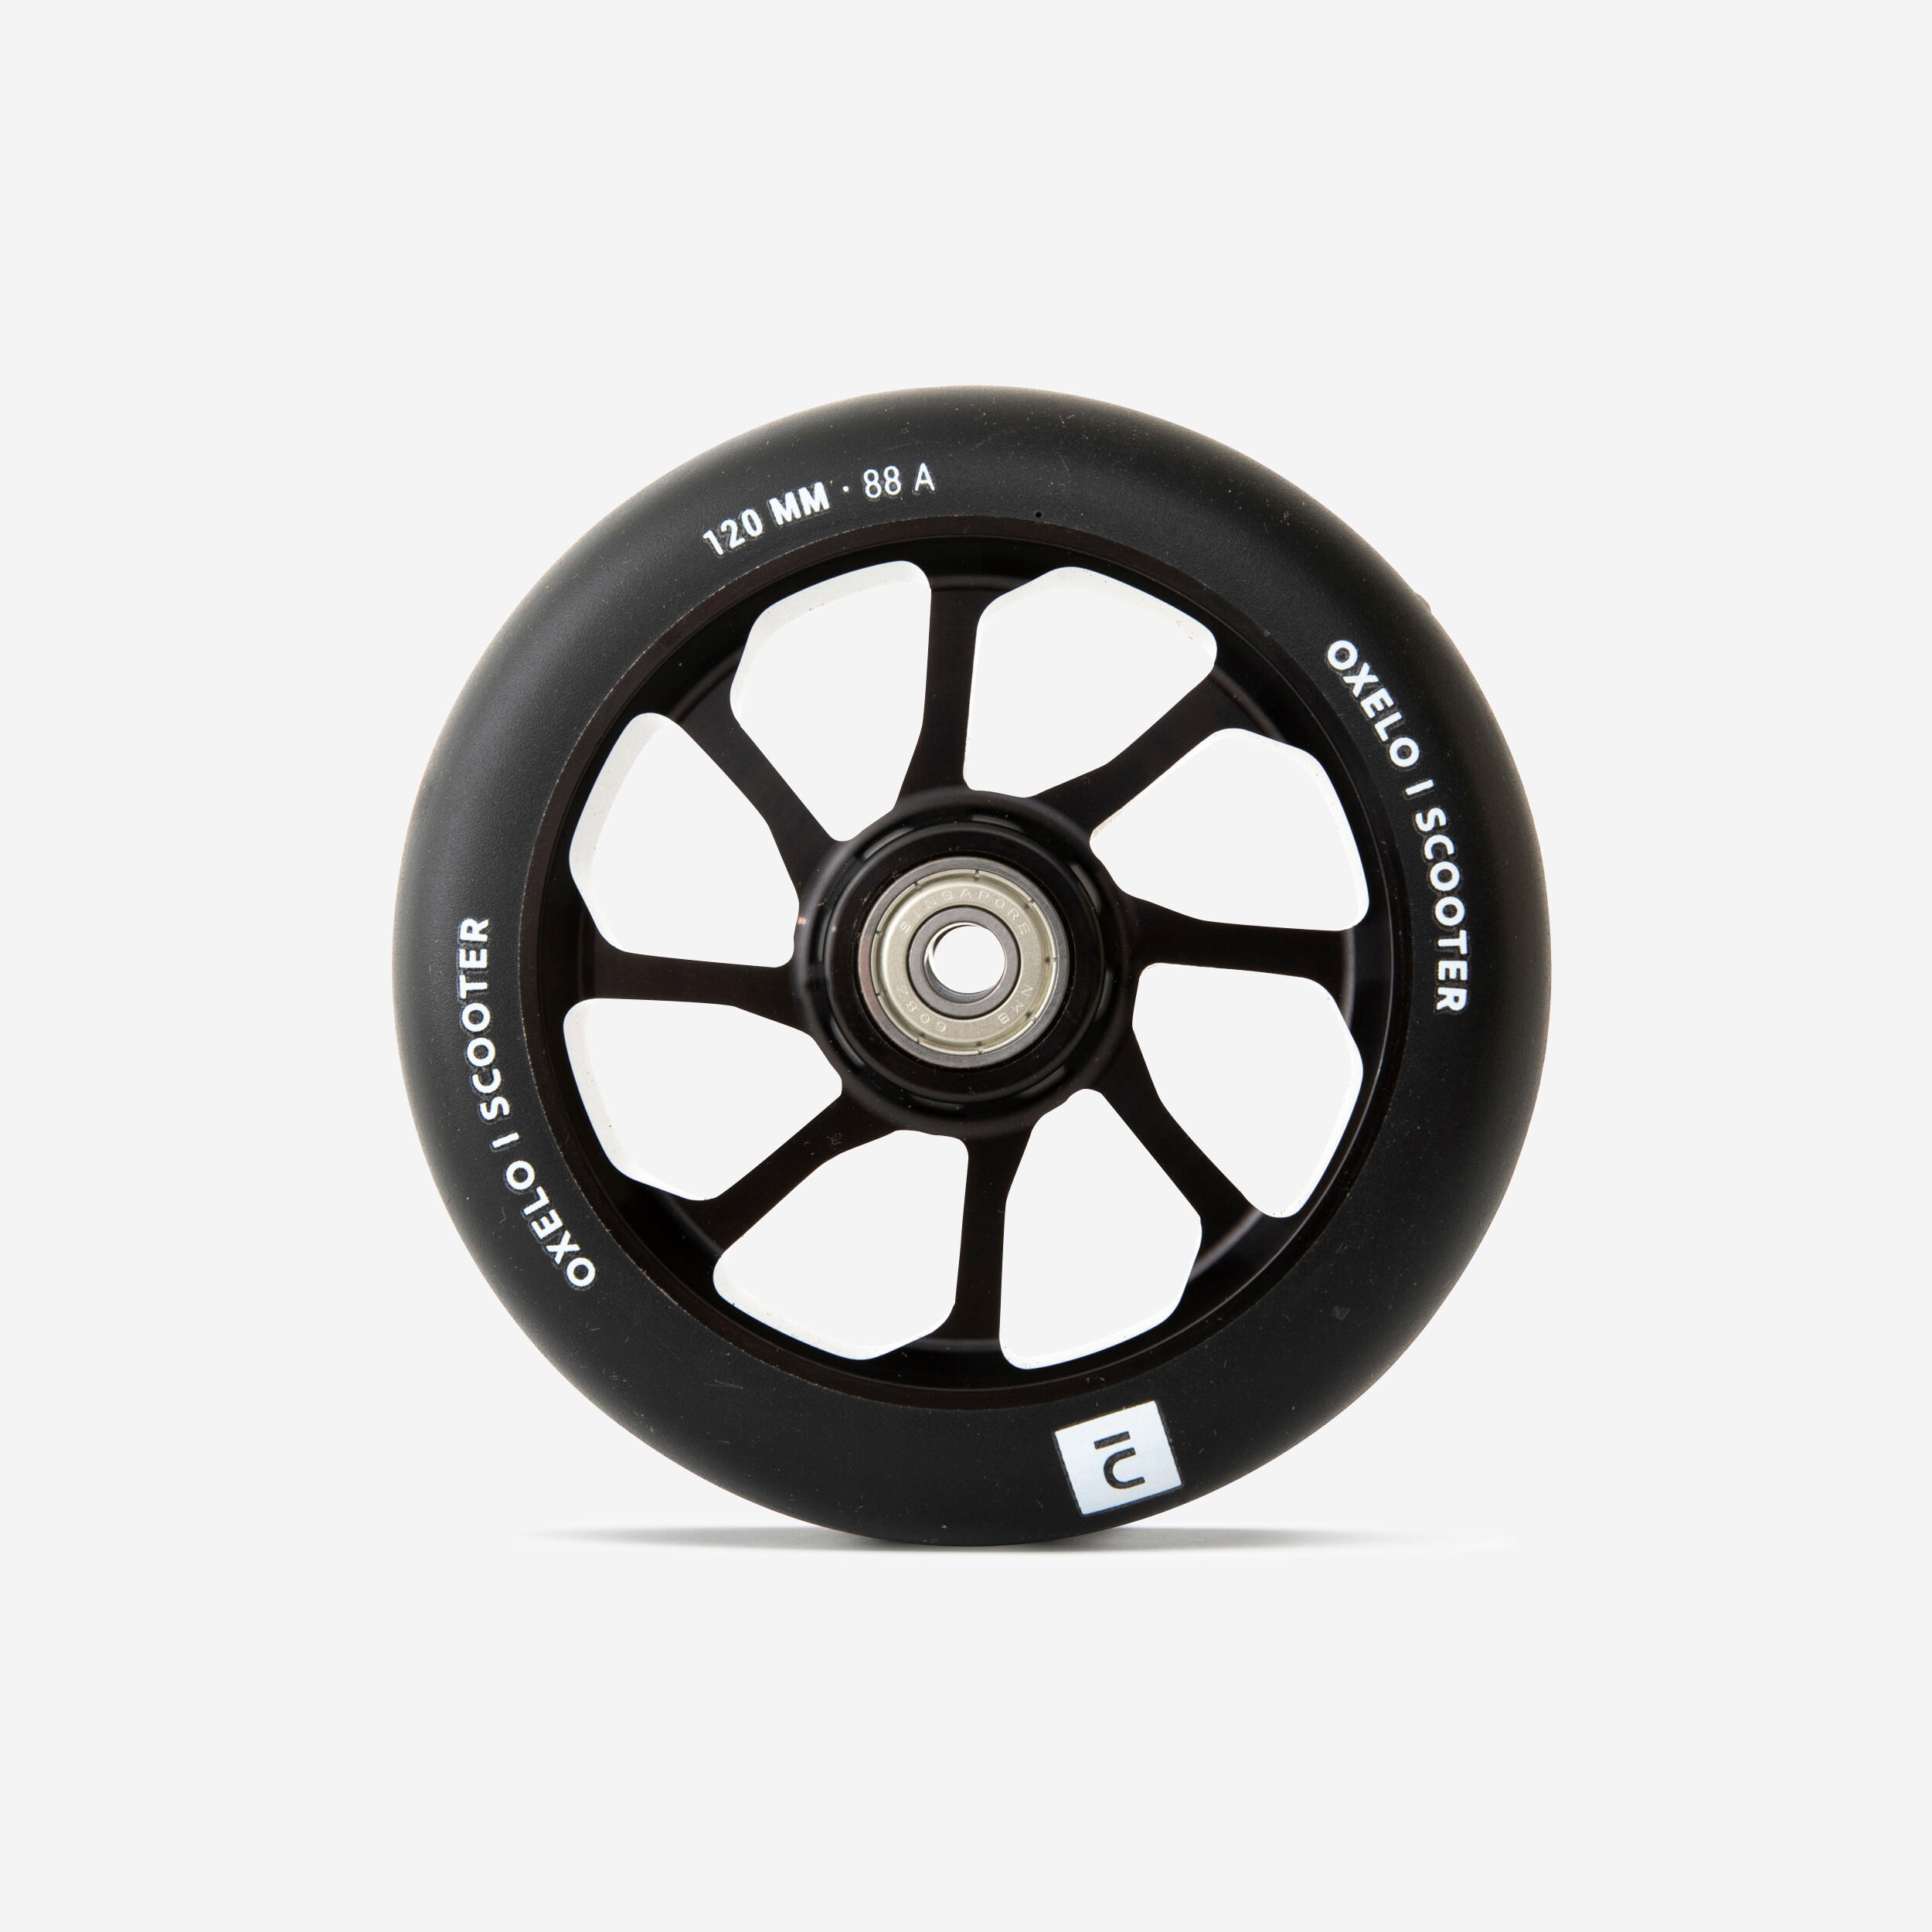 Freestyle Scooter Wheel 120 mm - OXELO